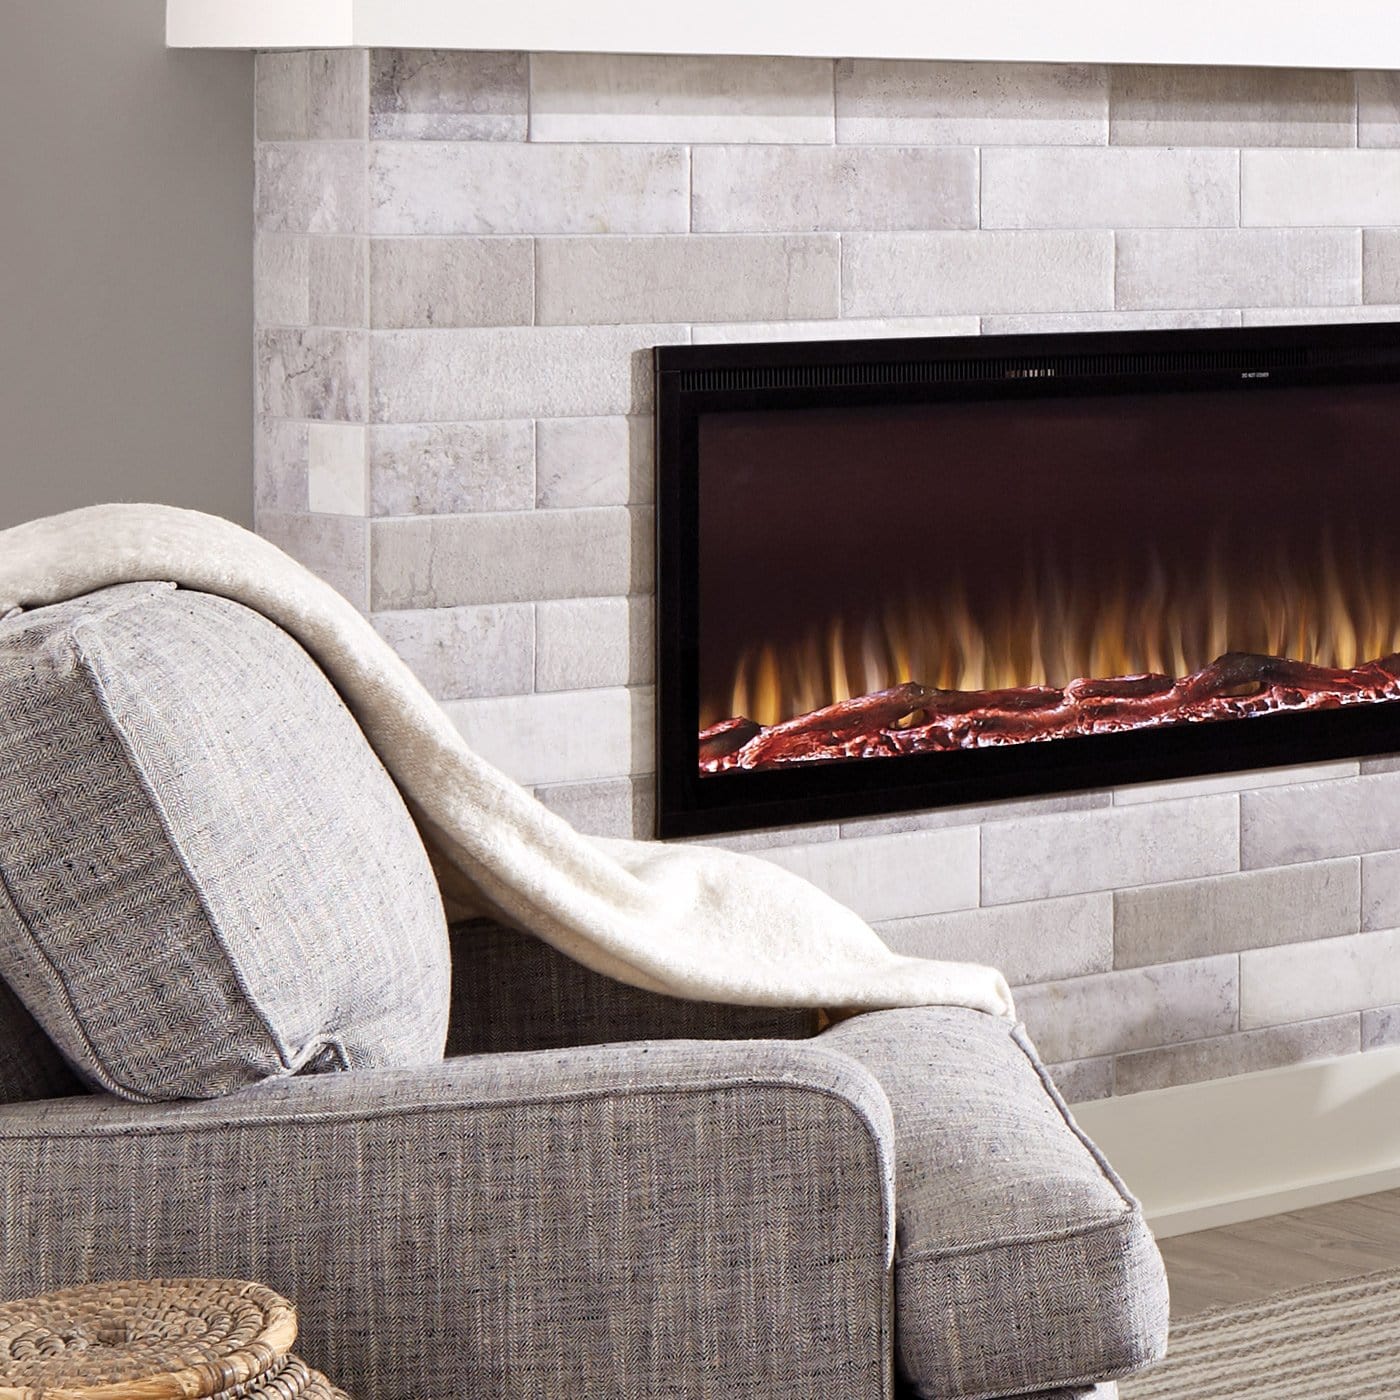 Touchstone Sideline Elite Electric Fireplace with logs in white brick mantel